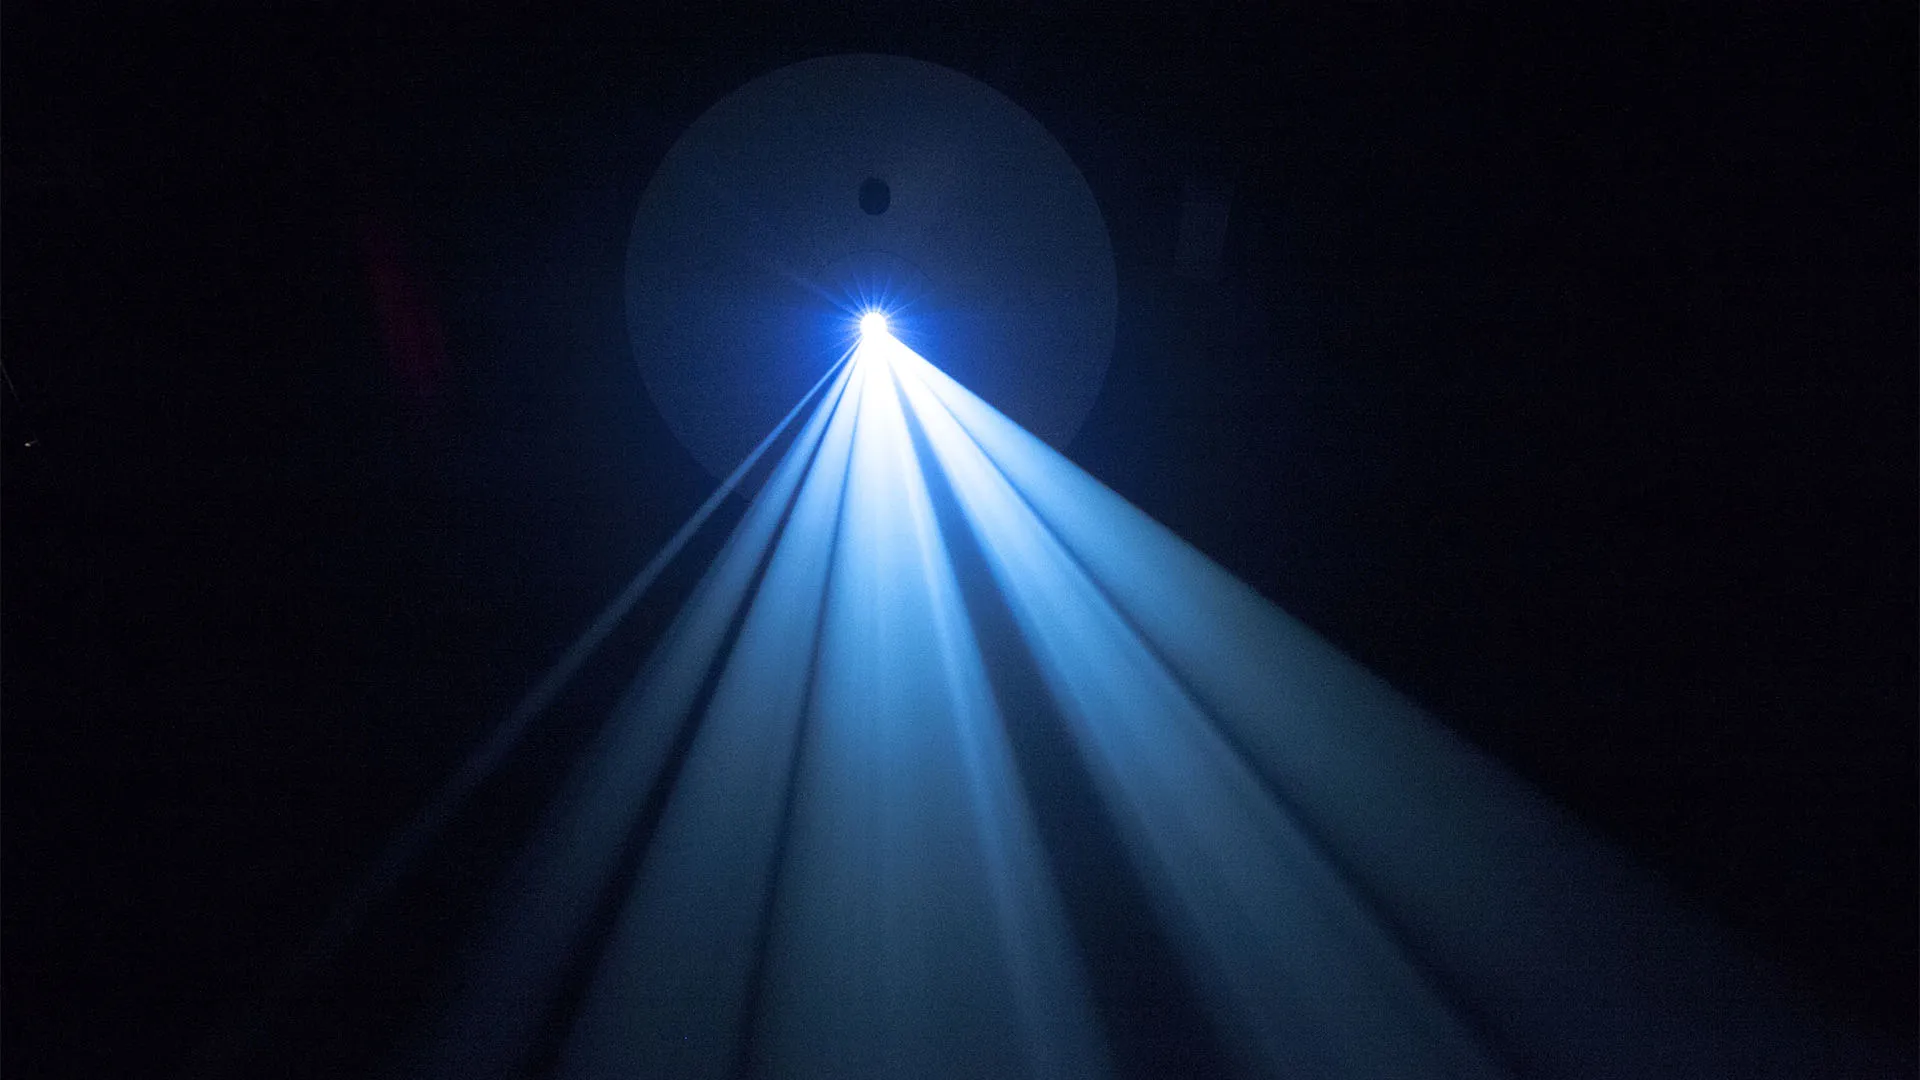 Talk to Light is a voice controlled artful light installation